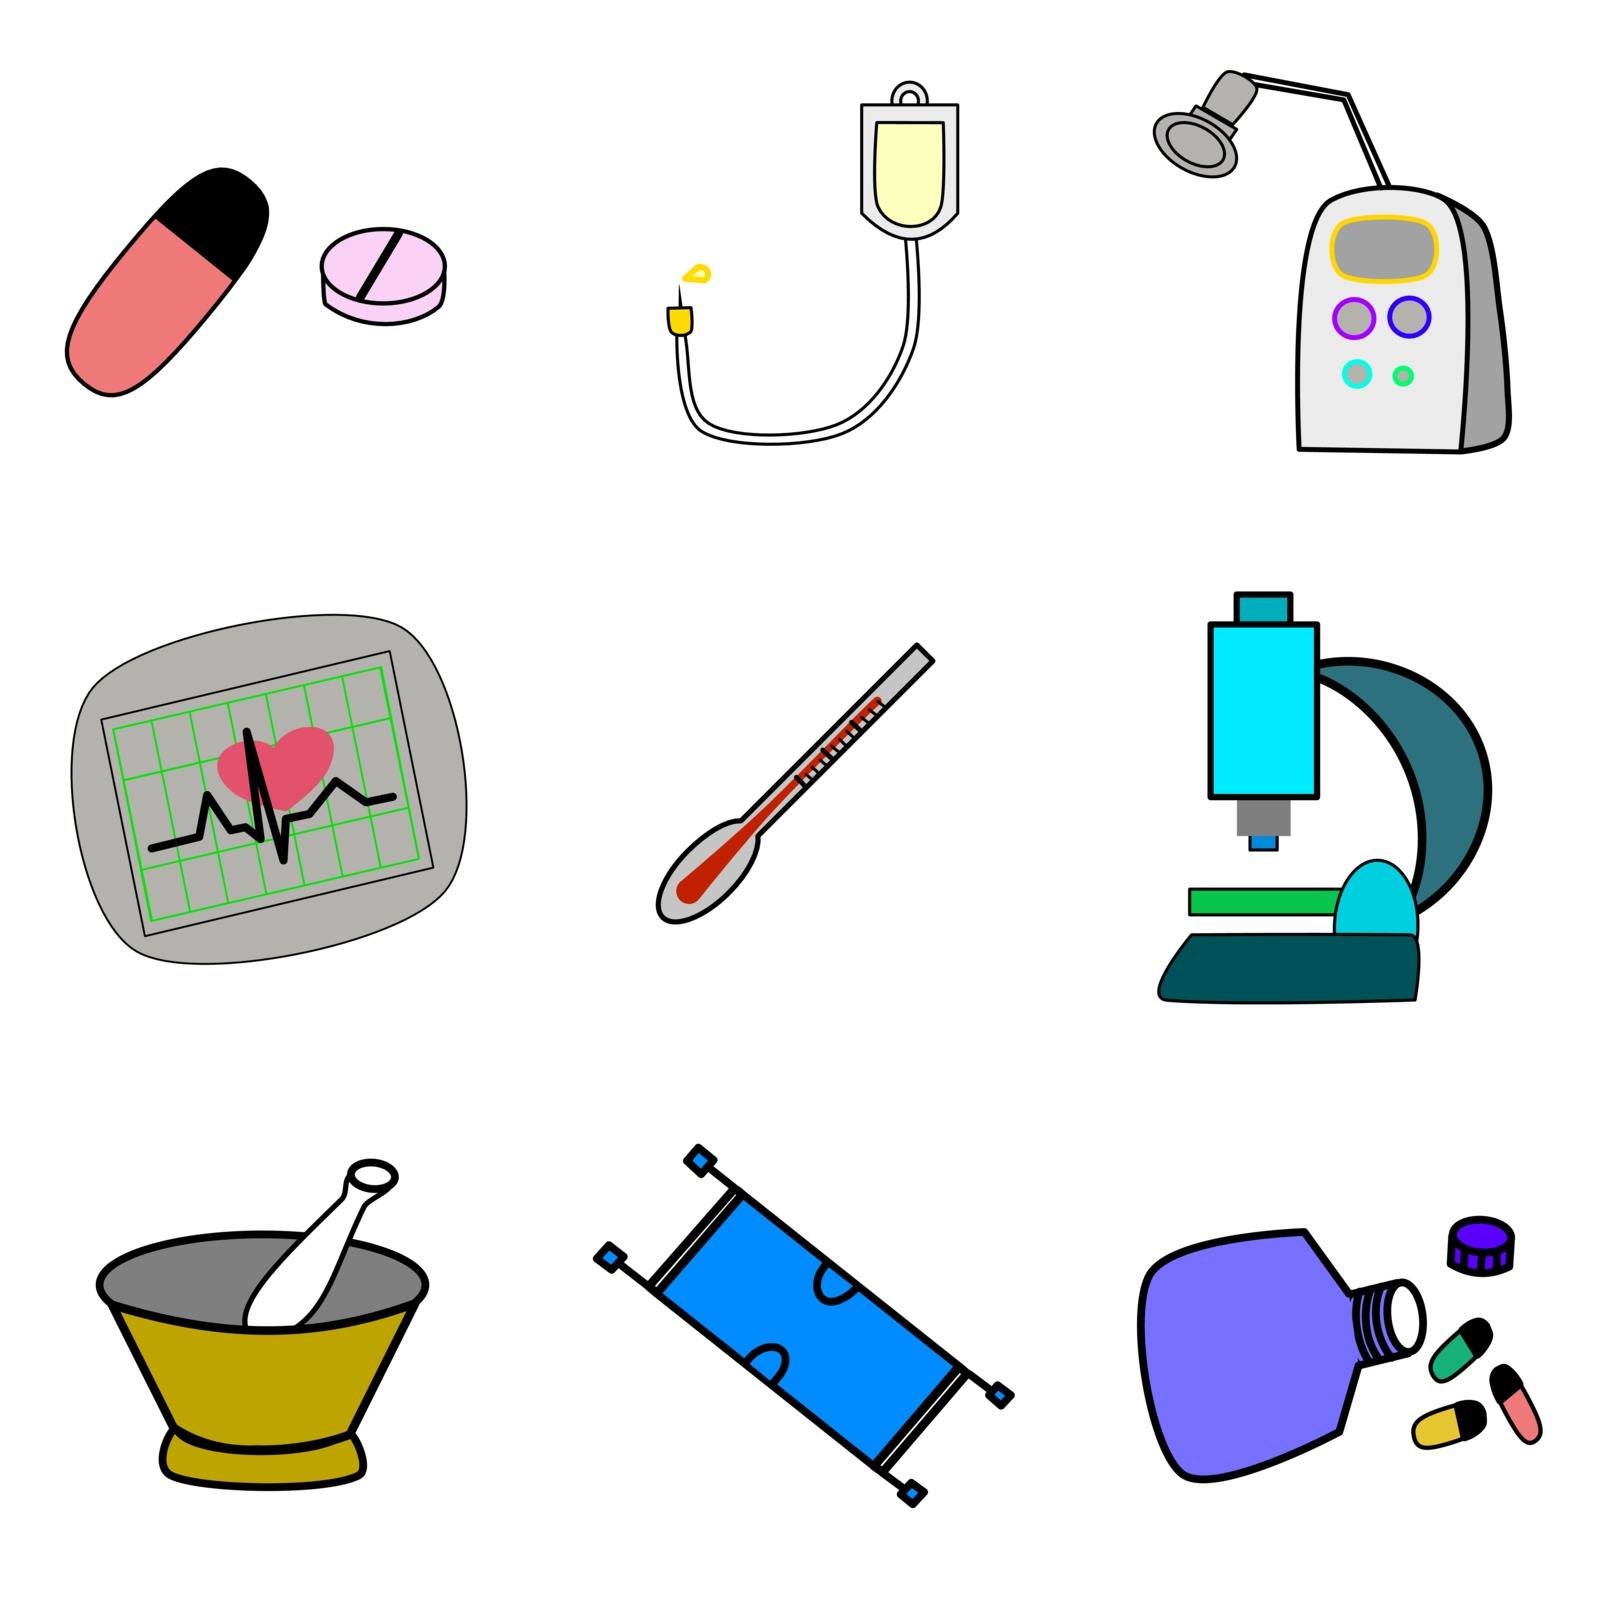 Hospital impotent equipment for patients diagnosis and treatment, ECG, microscope, ultrasound, medicine, mortar, thermometer and cradle on white background.